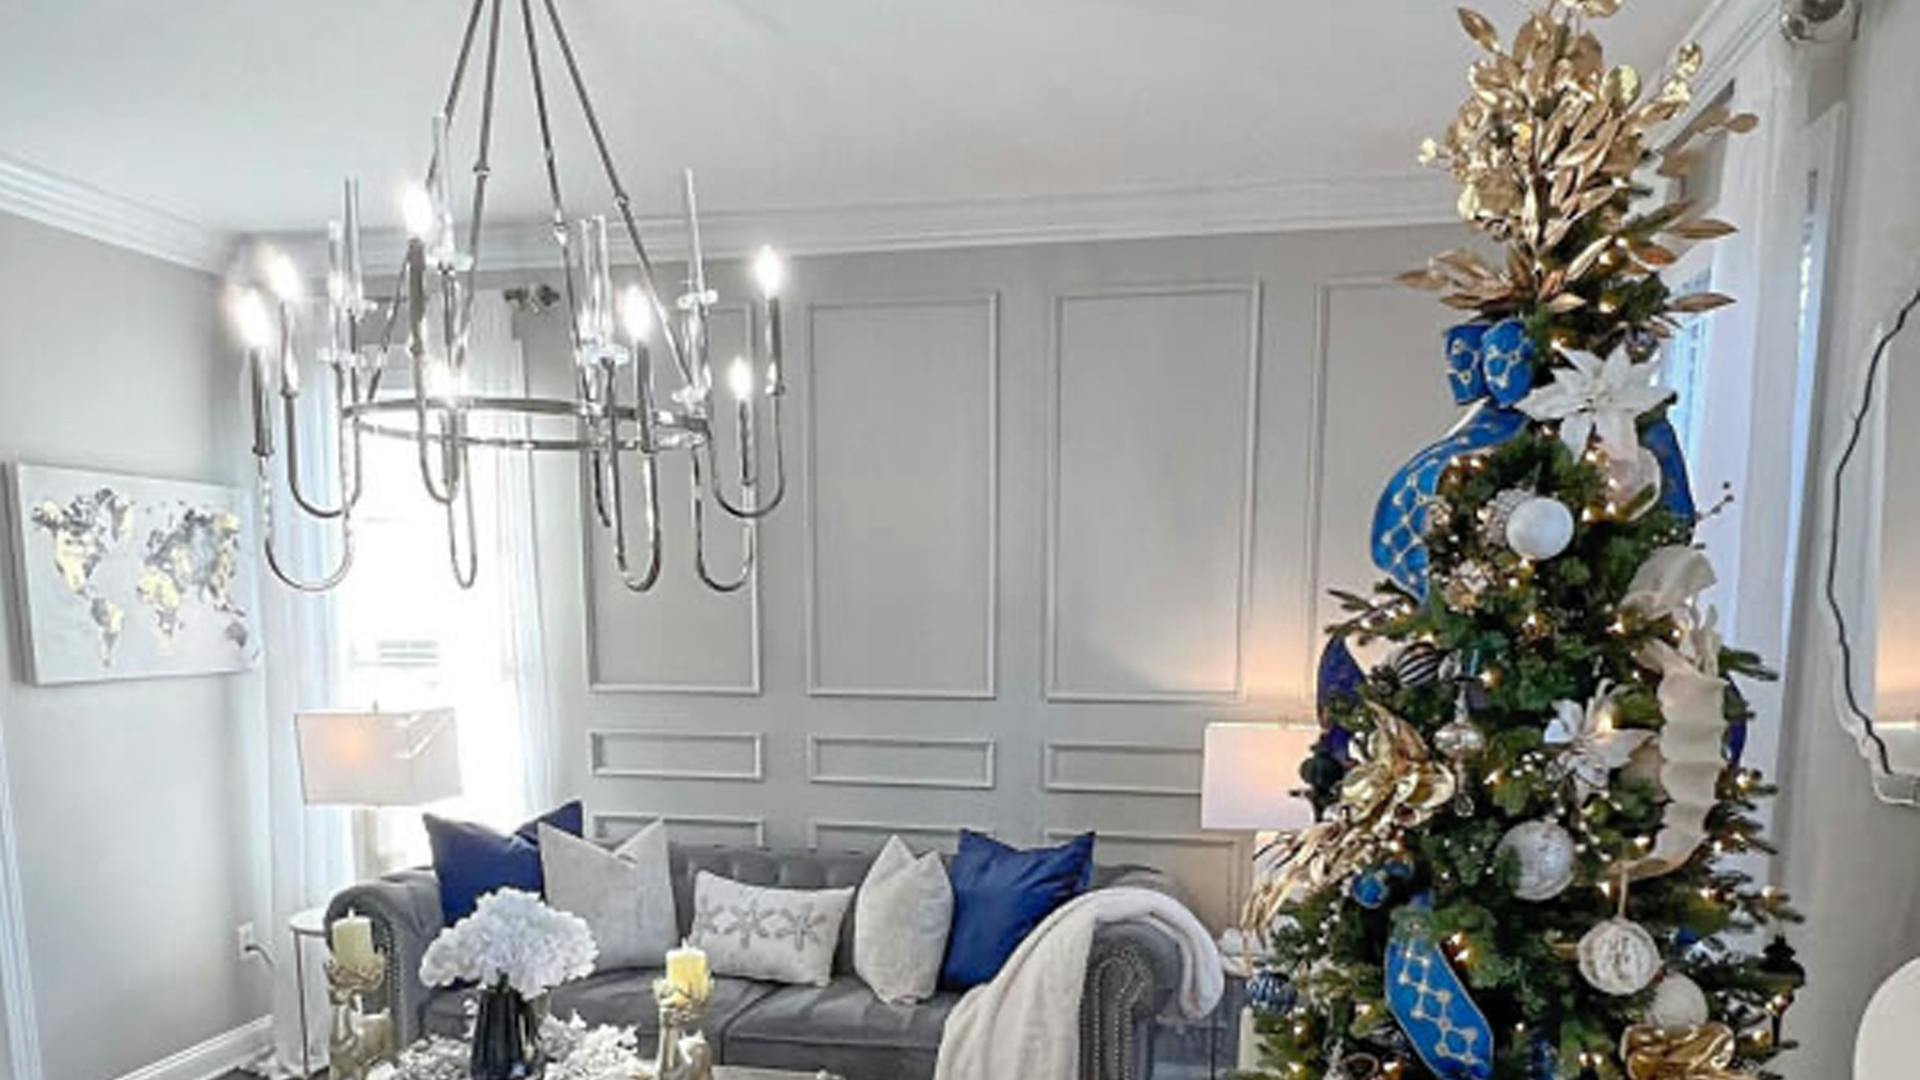 MojisStyle's Living room decorated for the holidays featuring a Kichler chandelier